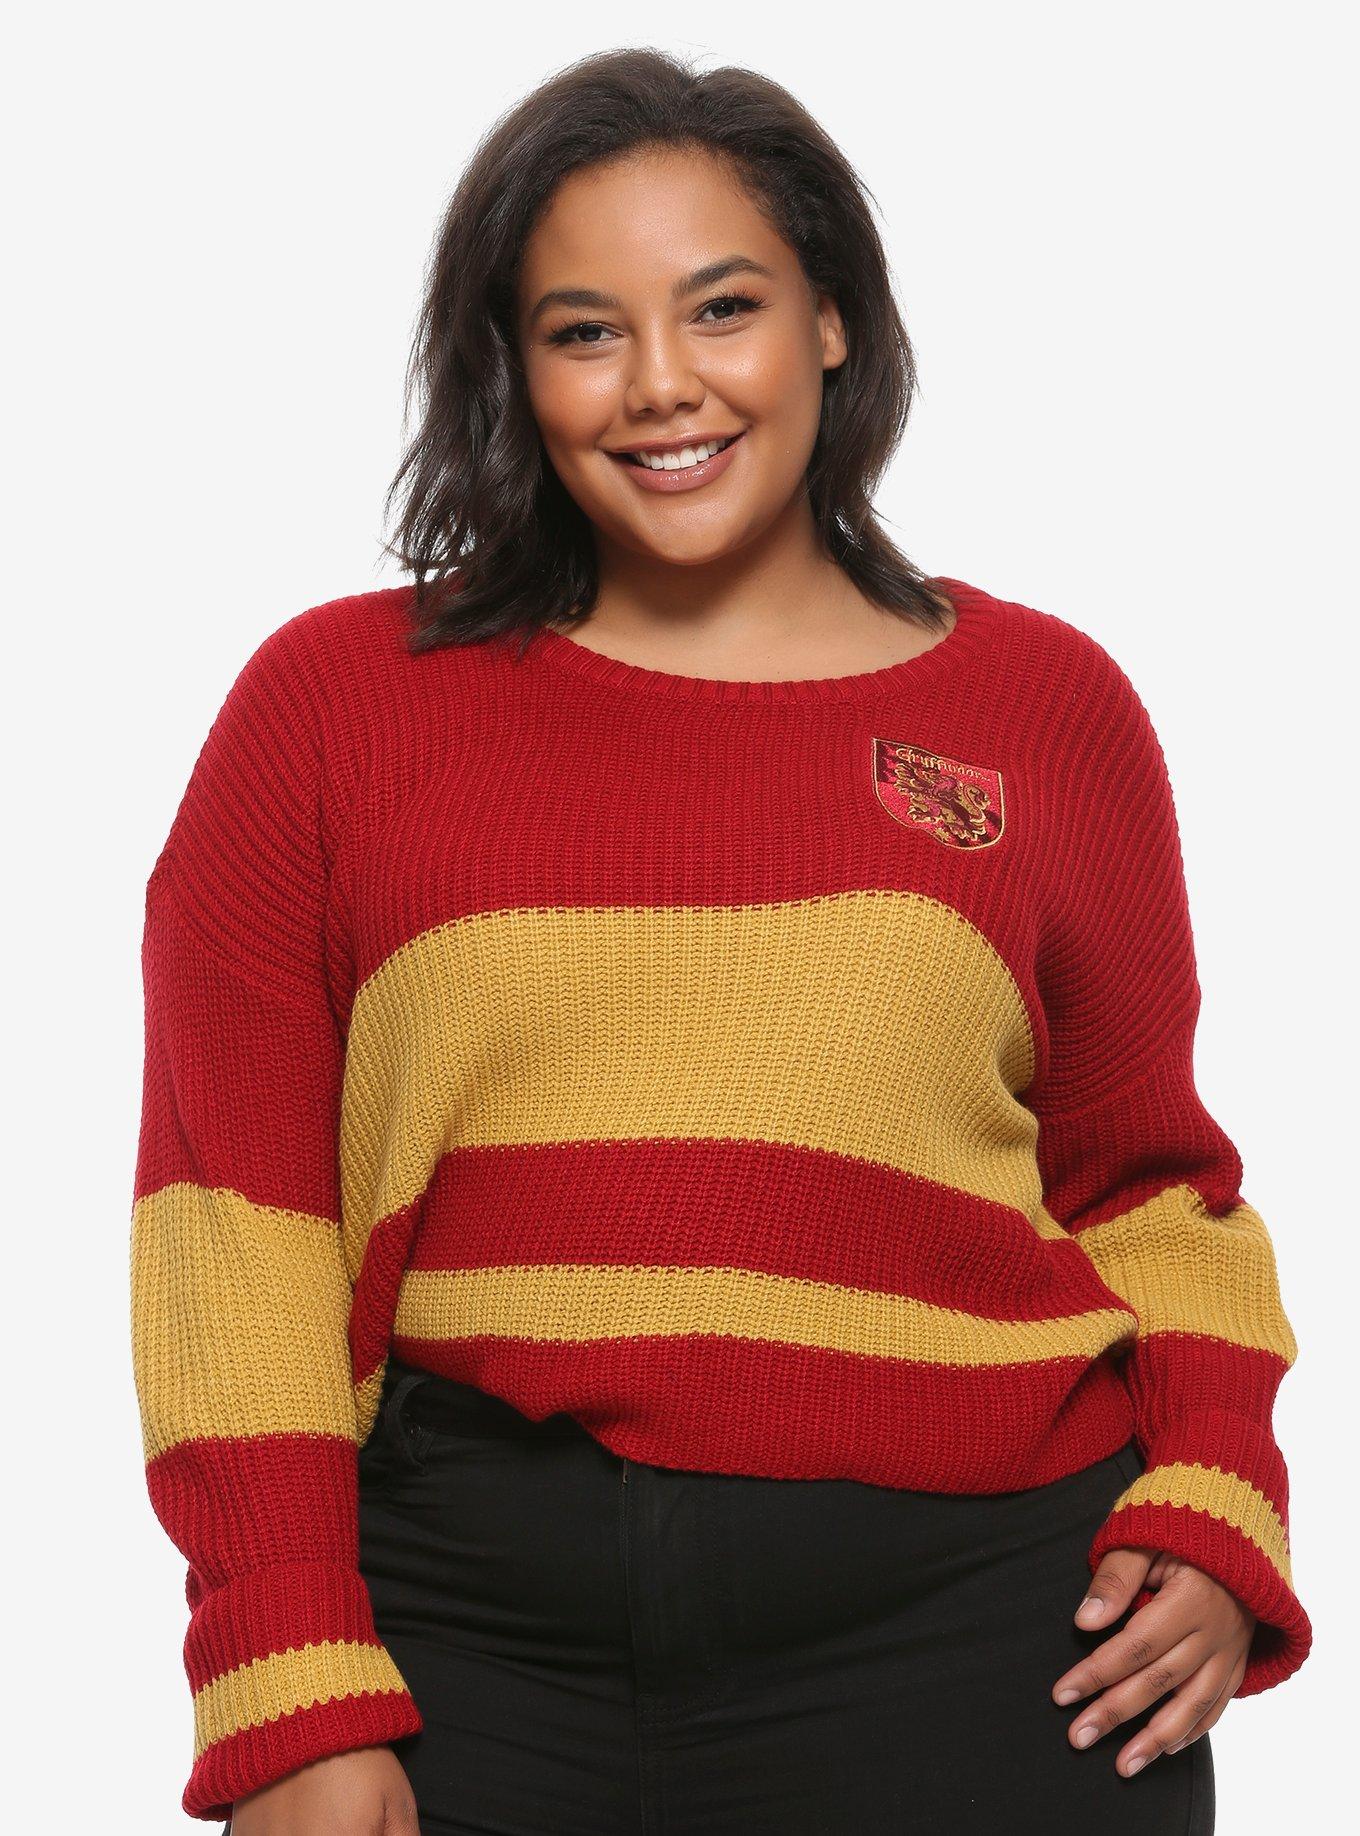 Harry Potter Gryffindor Girls Quidditch Sweater Plus Size, RED, hi-res